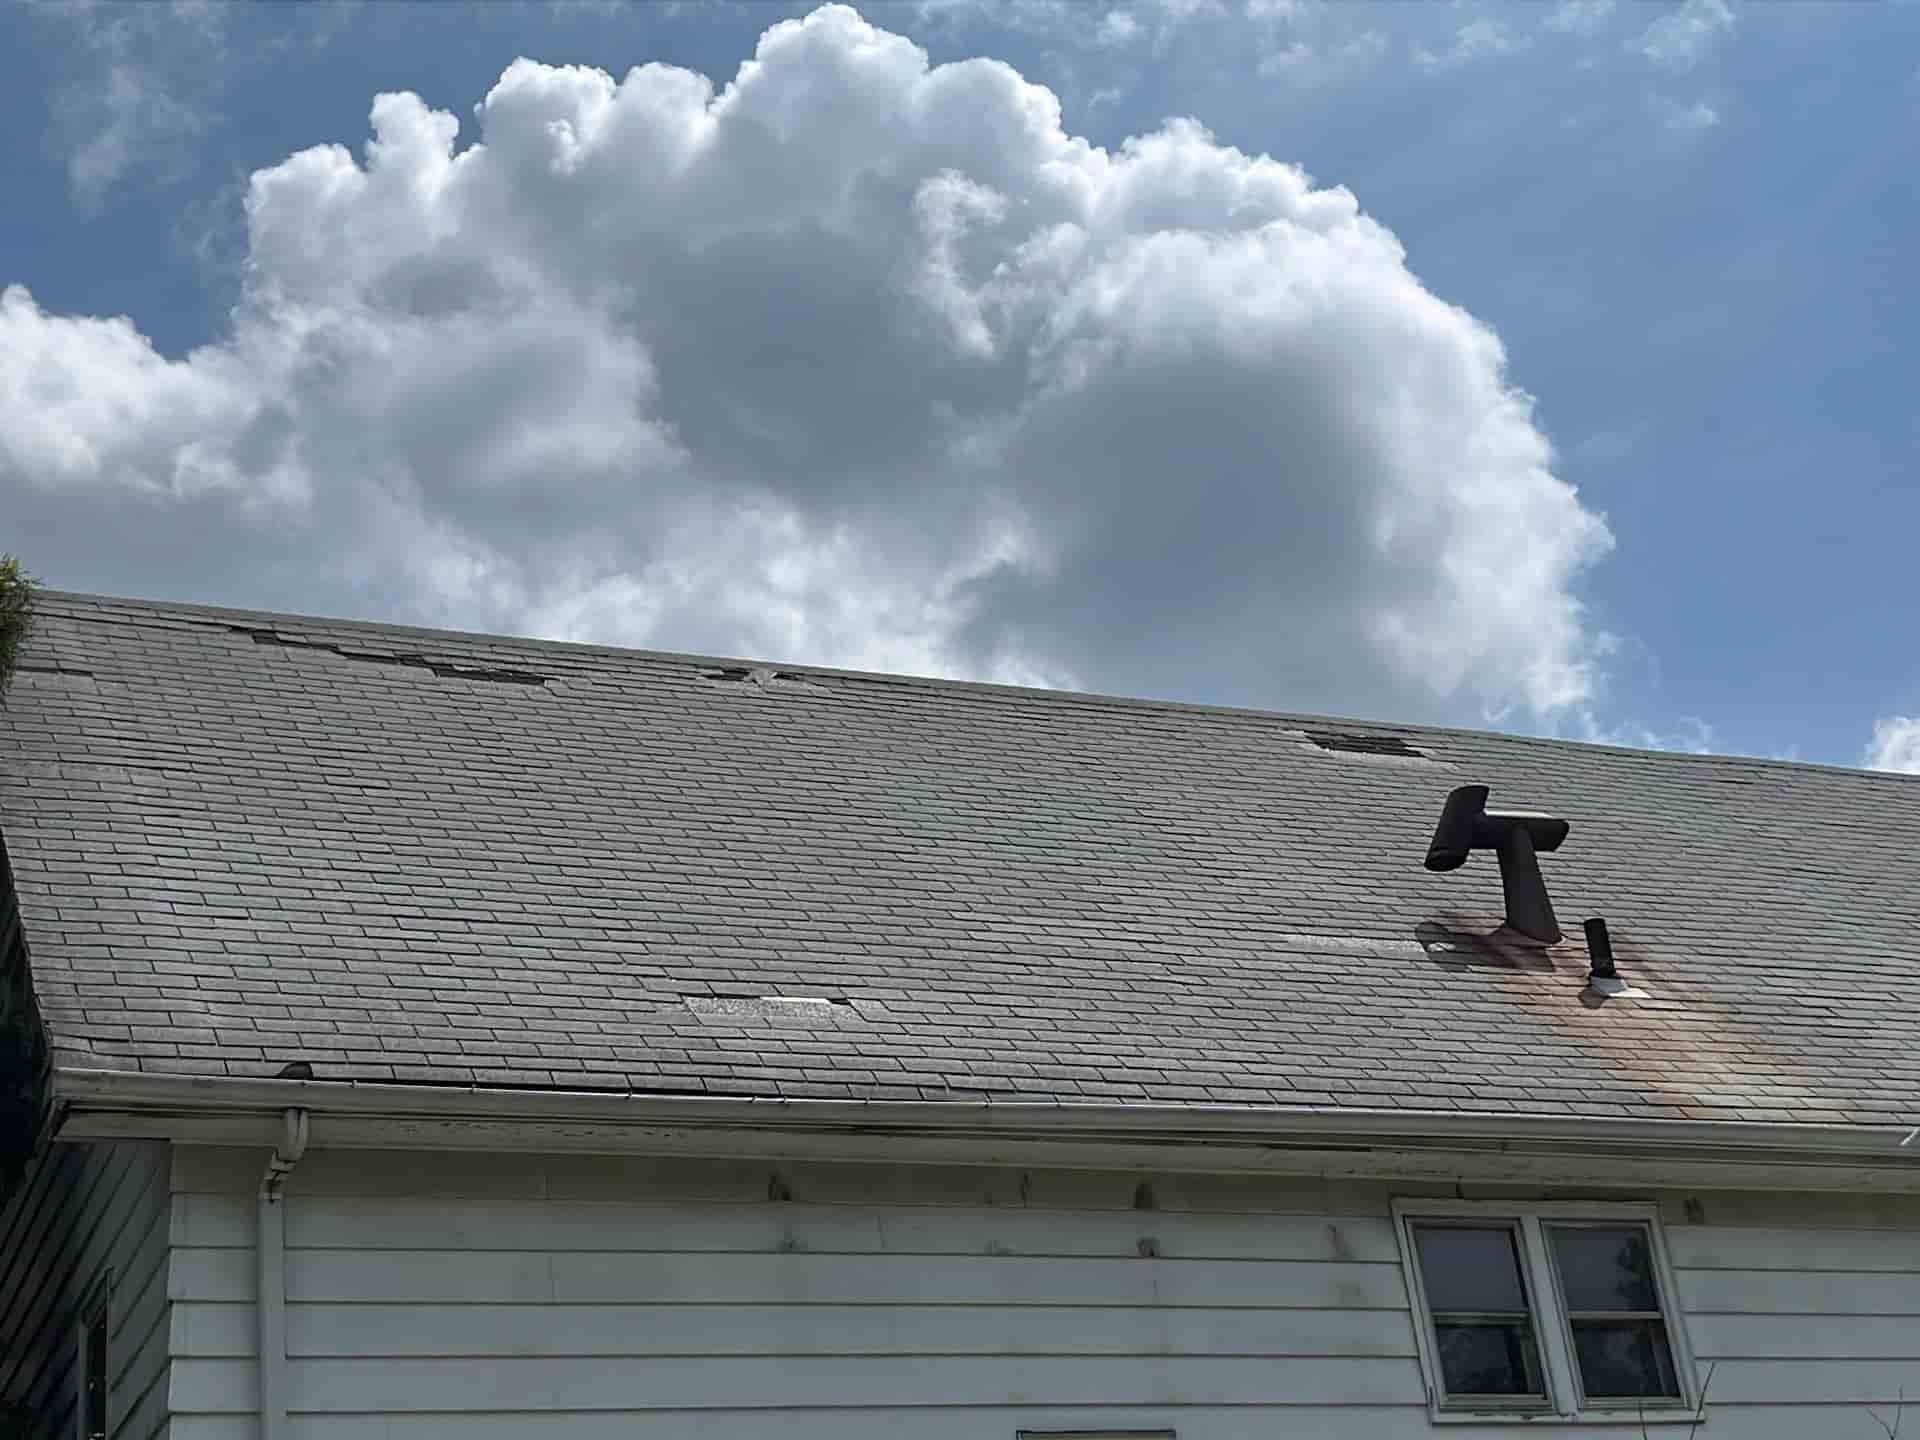 The roof of a house has a hole in it and requires emergency roofing repair.